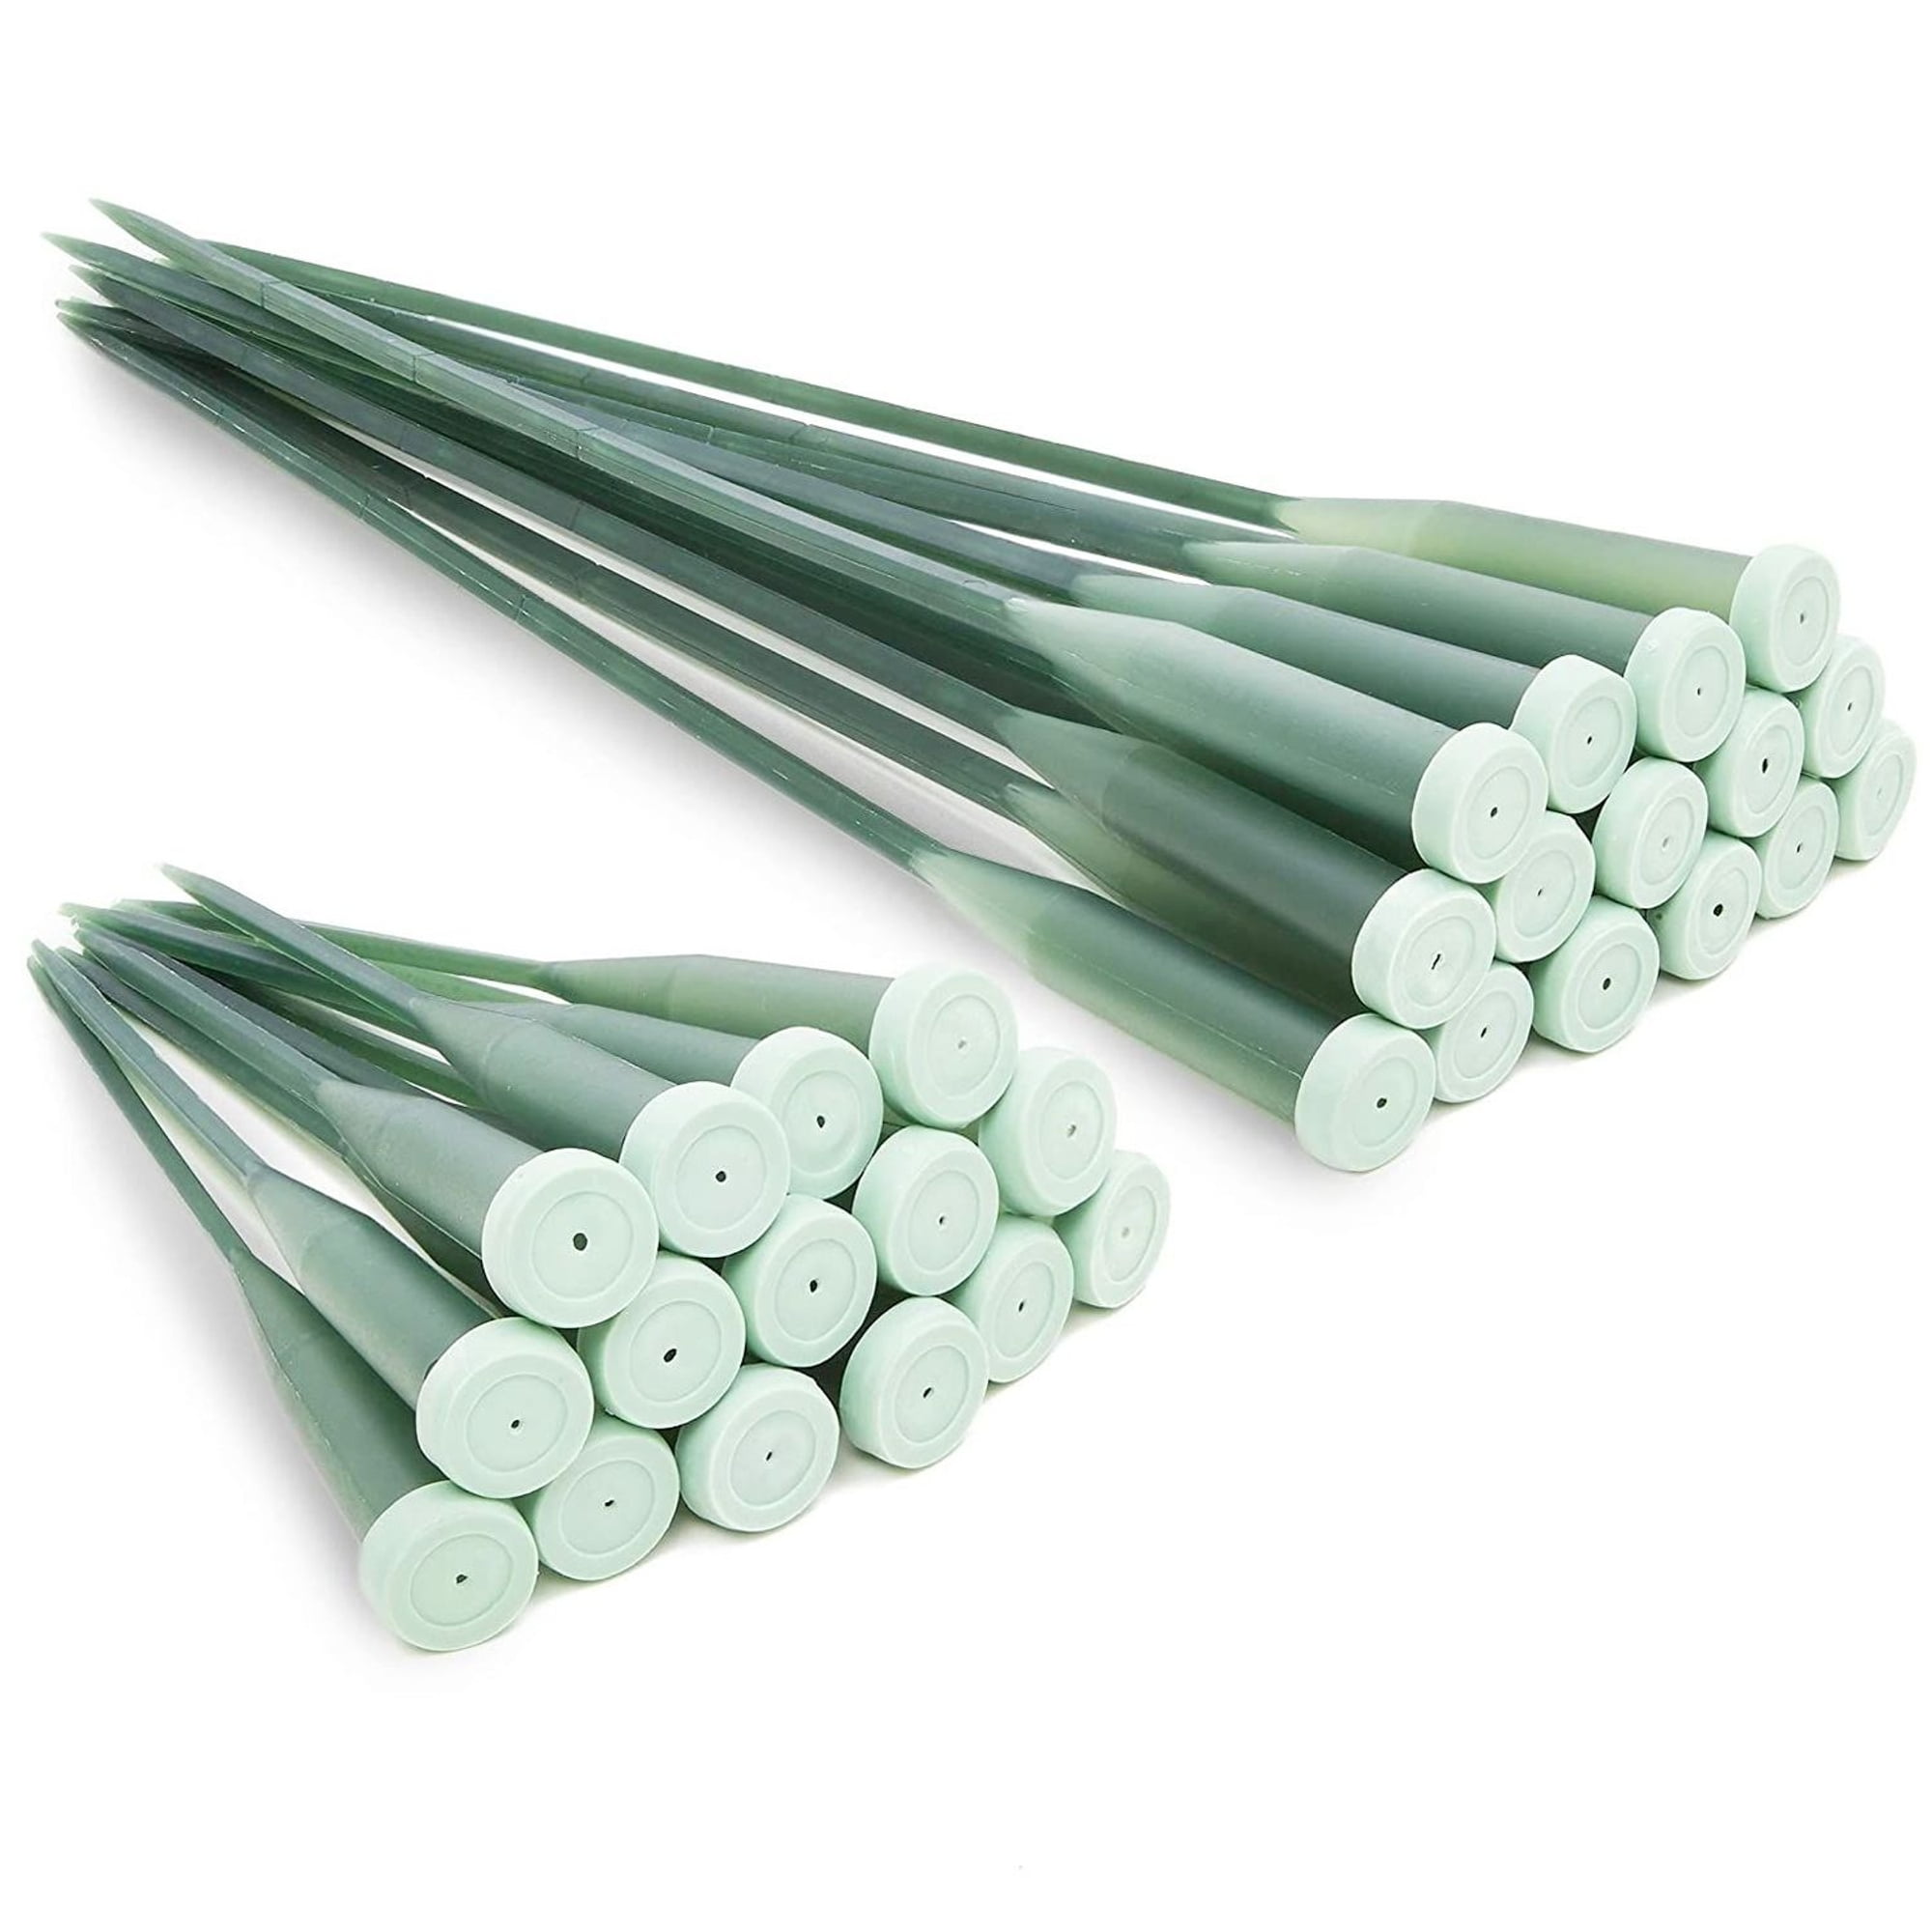 25 Pack Water Tubes for Flowers Water Tubes for Flower Arrangements 